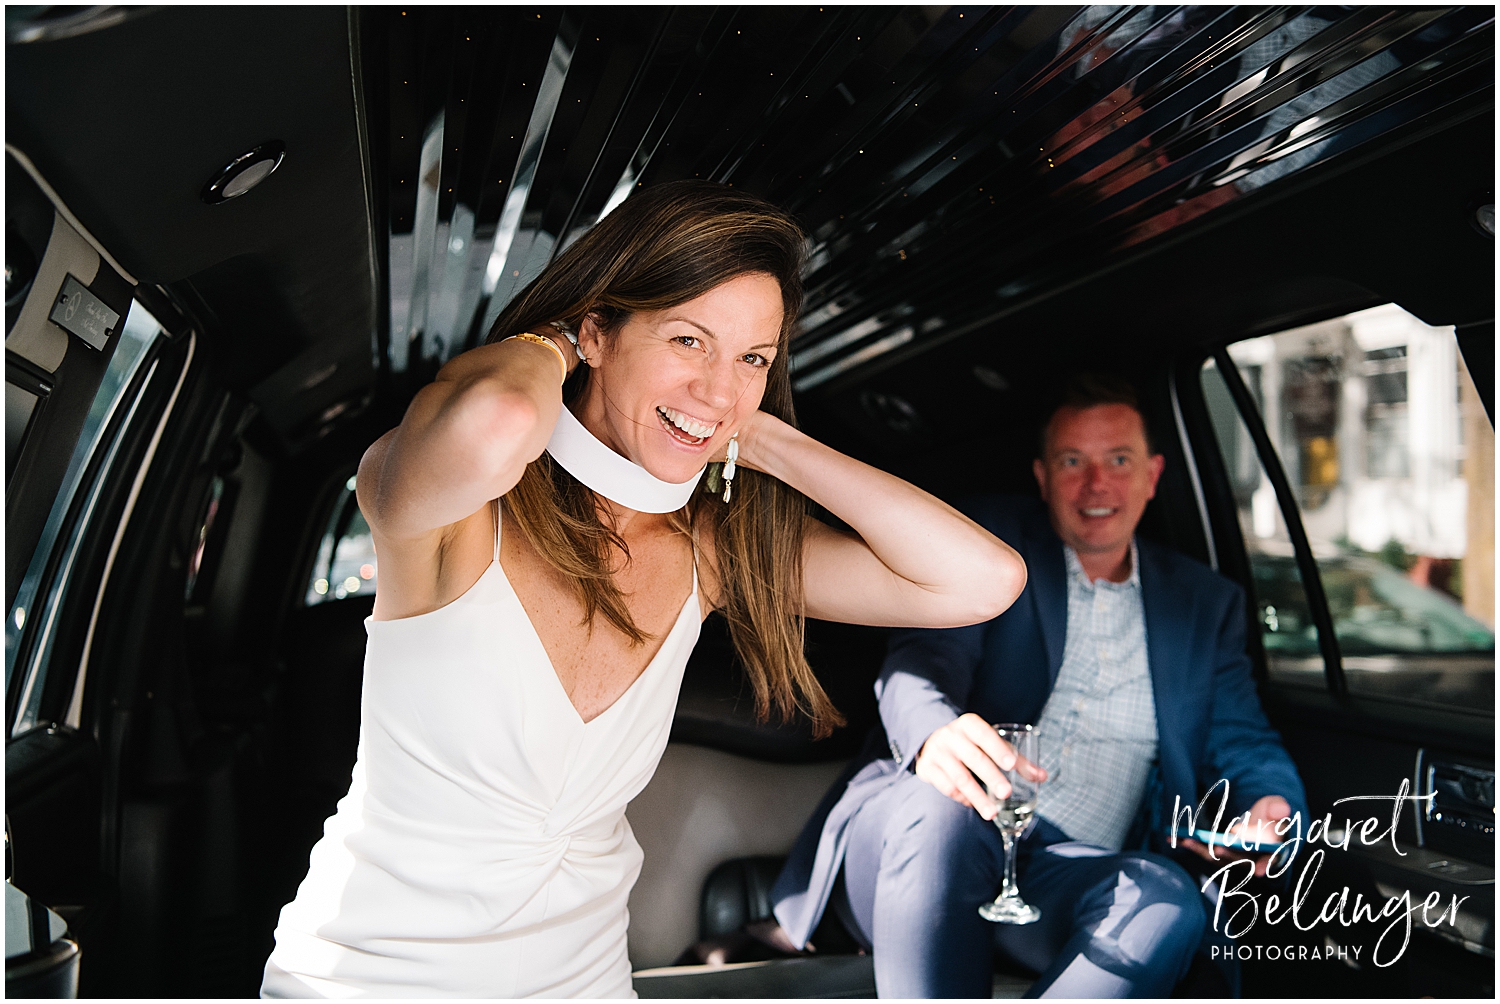 A bride laughs while adjusting a clerical collar inside a limousine with the groom in a suit seated in the background.